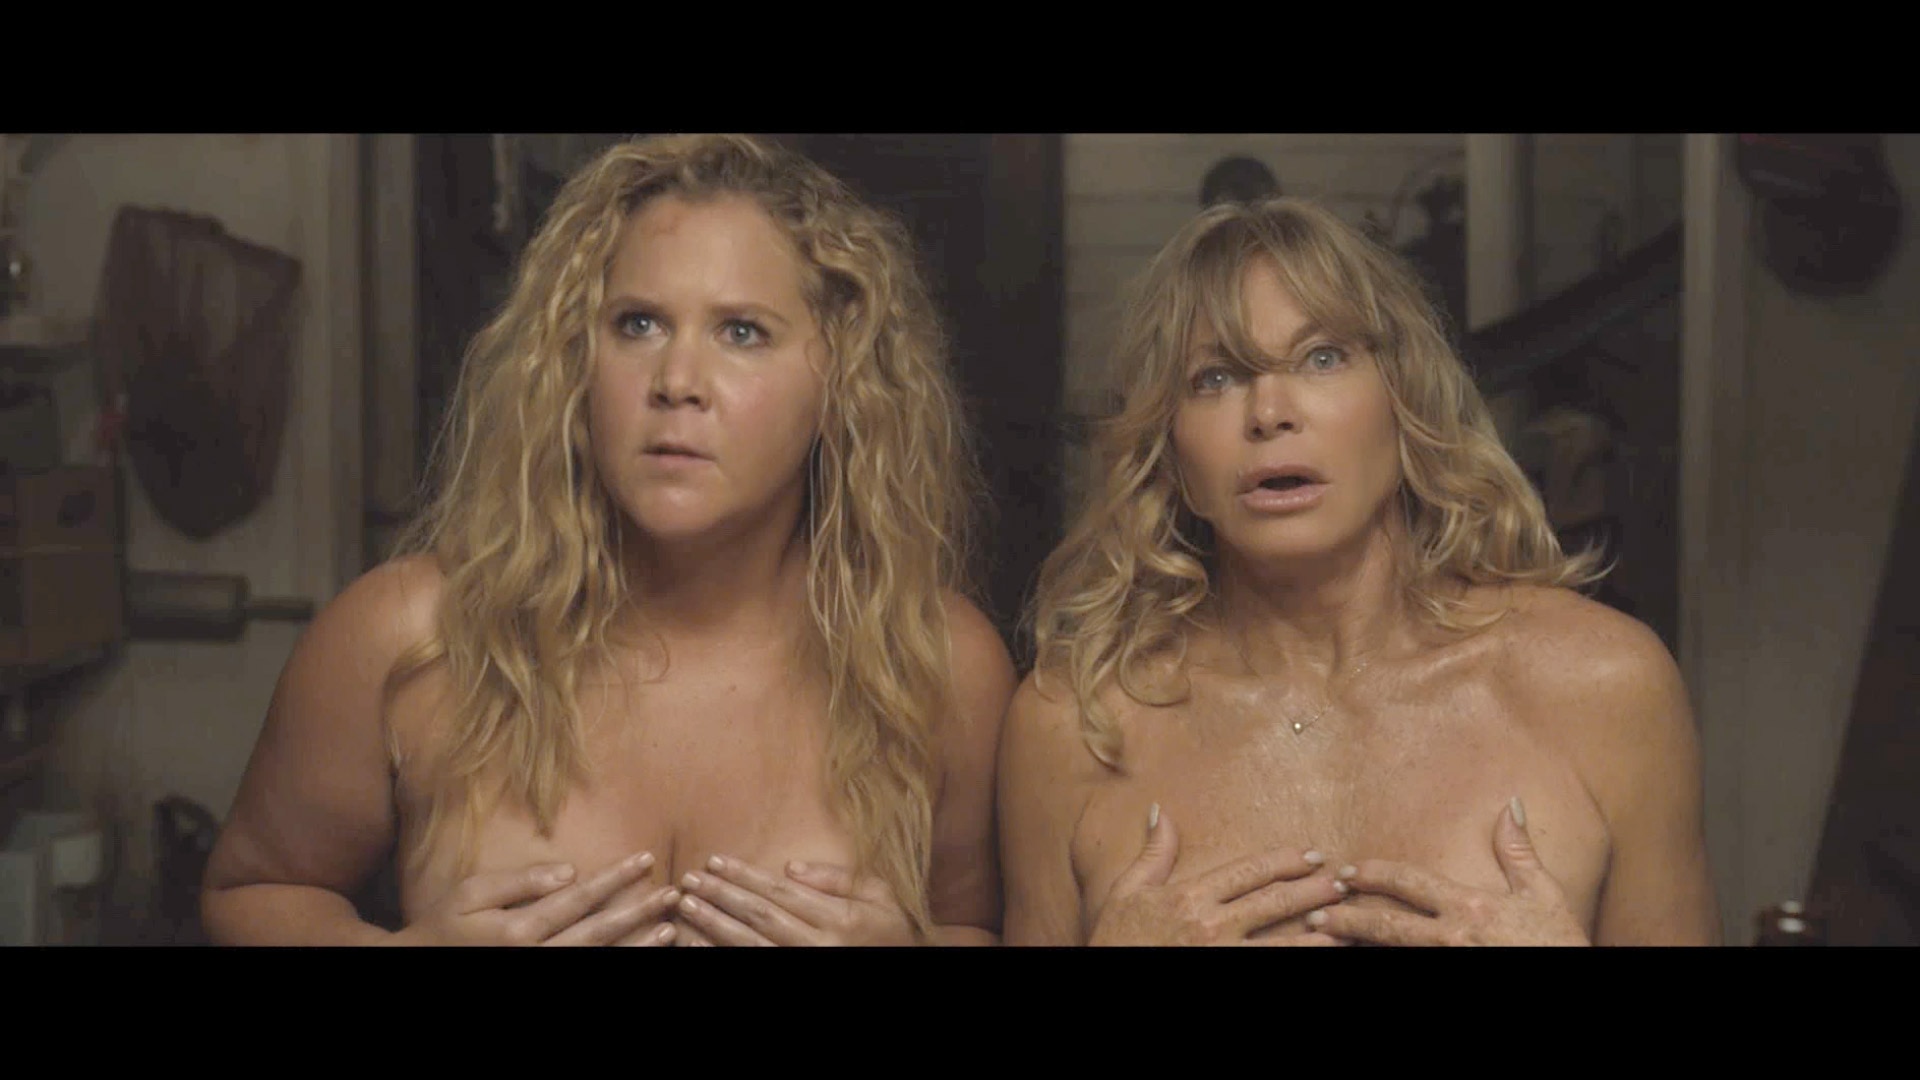 cass simmons add amy schumer snatched boobs photo